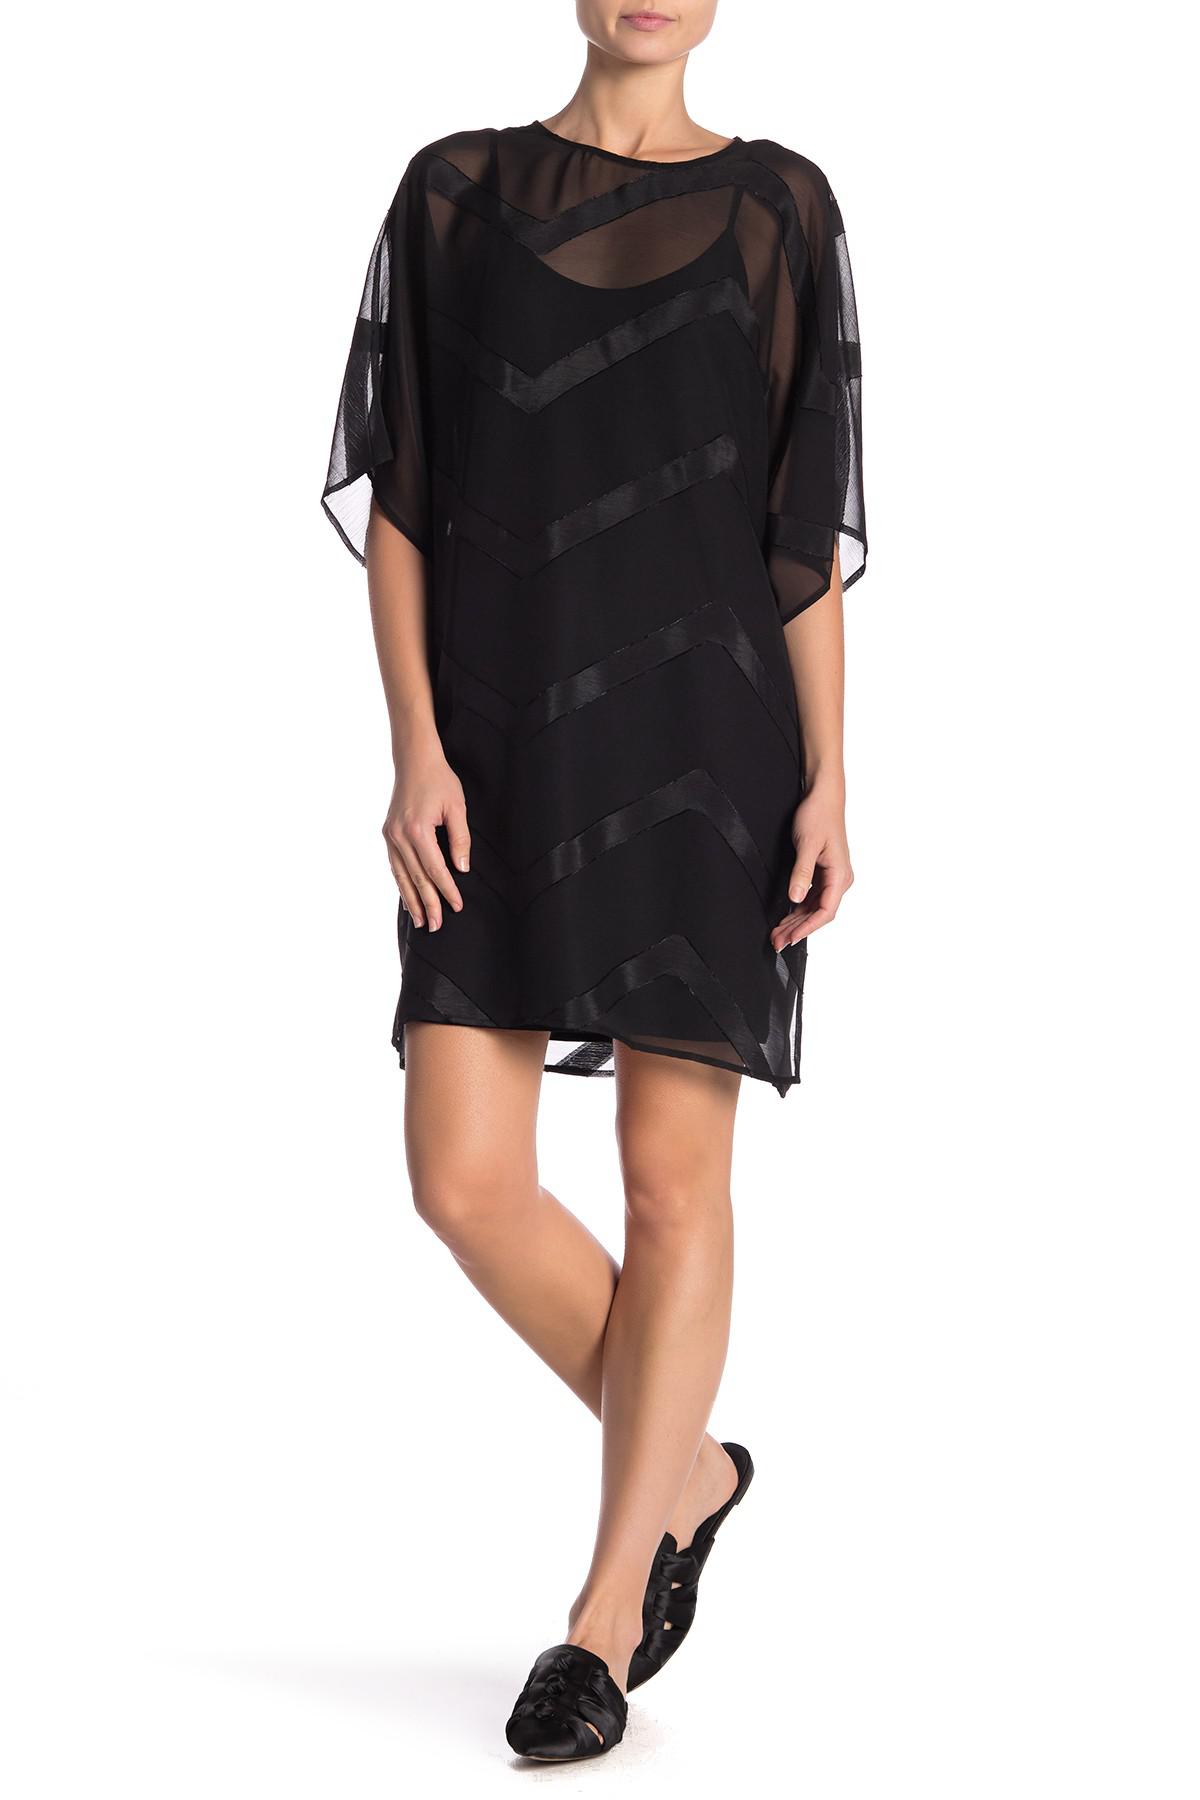 Vince Camuto Synthetic Chevron Overlay Shift Dress in Black - Lyst